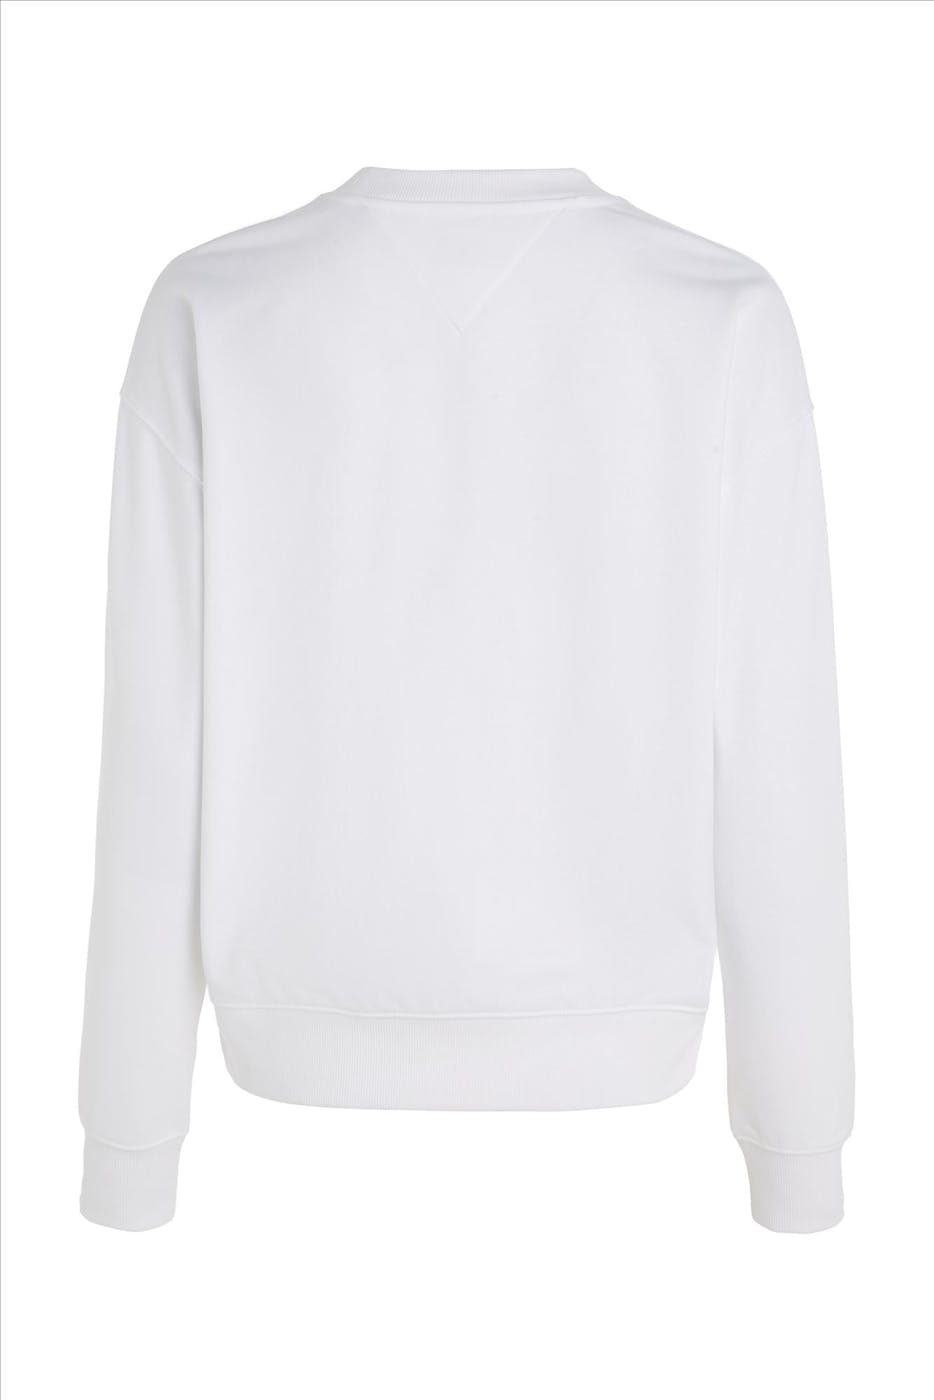 Tommy Jeans - Witte Essential Logo sweater